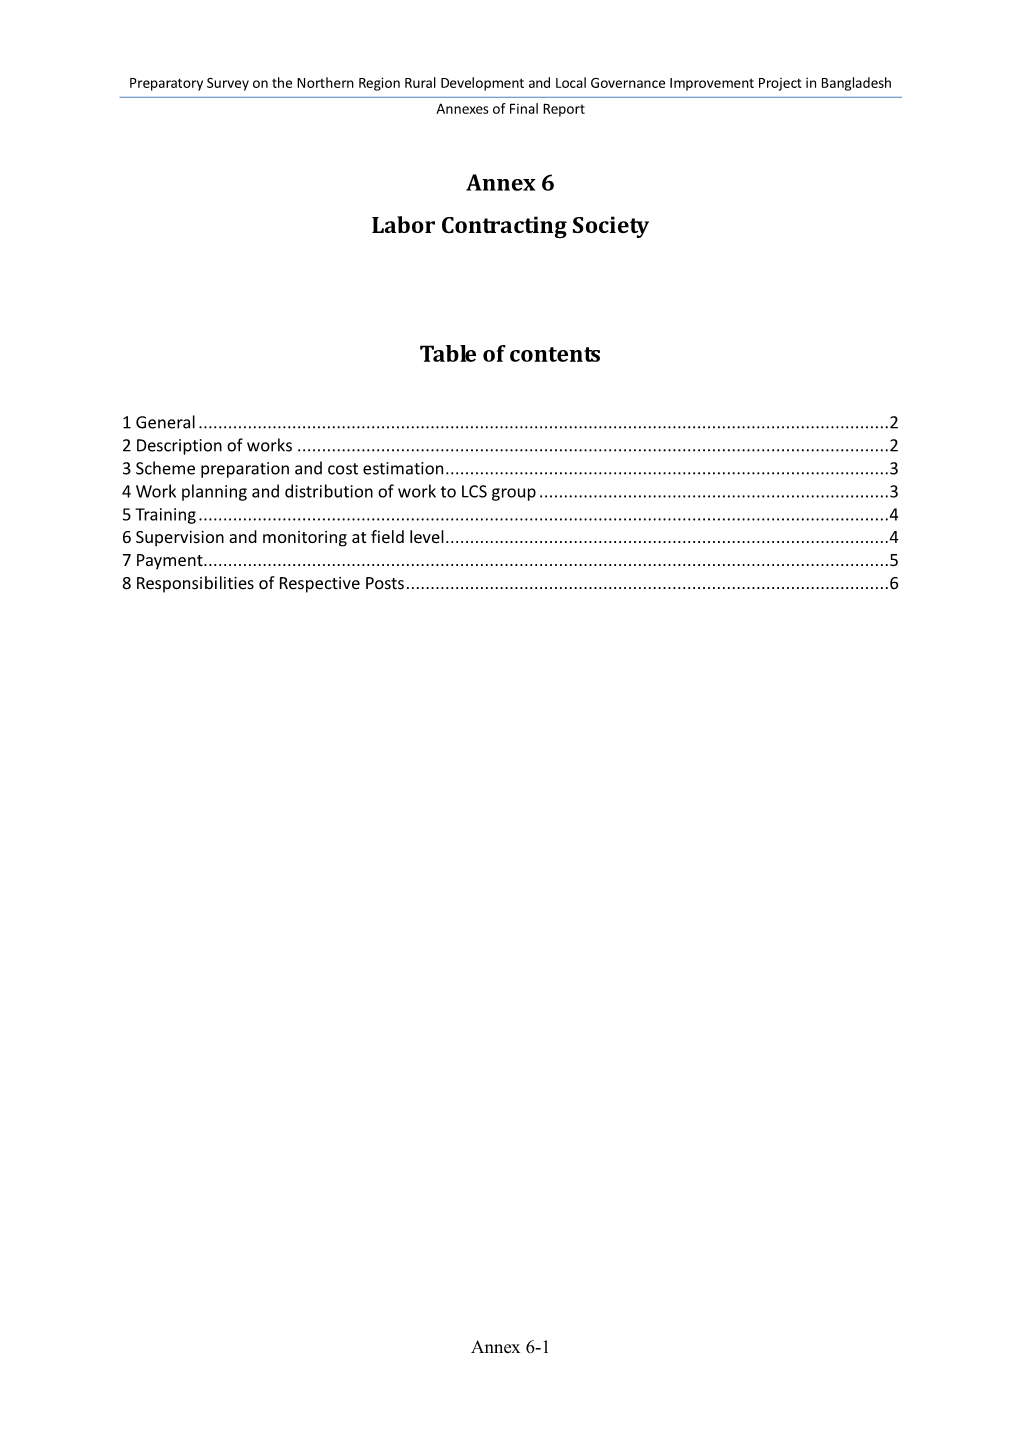 Annex 6 Labor Contracting Society Table of Contents